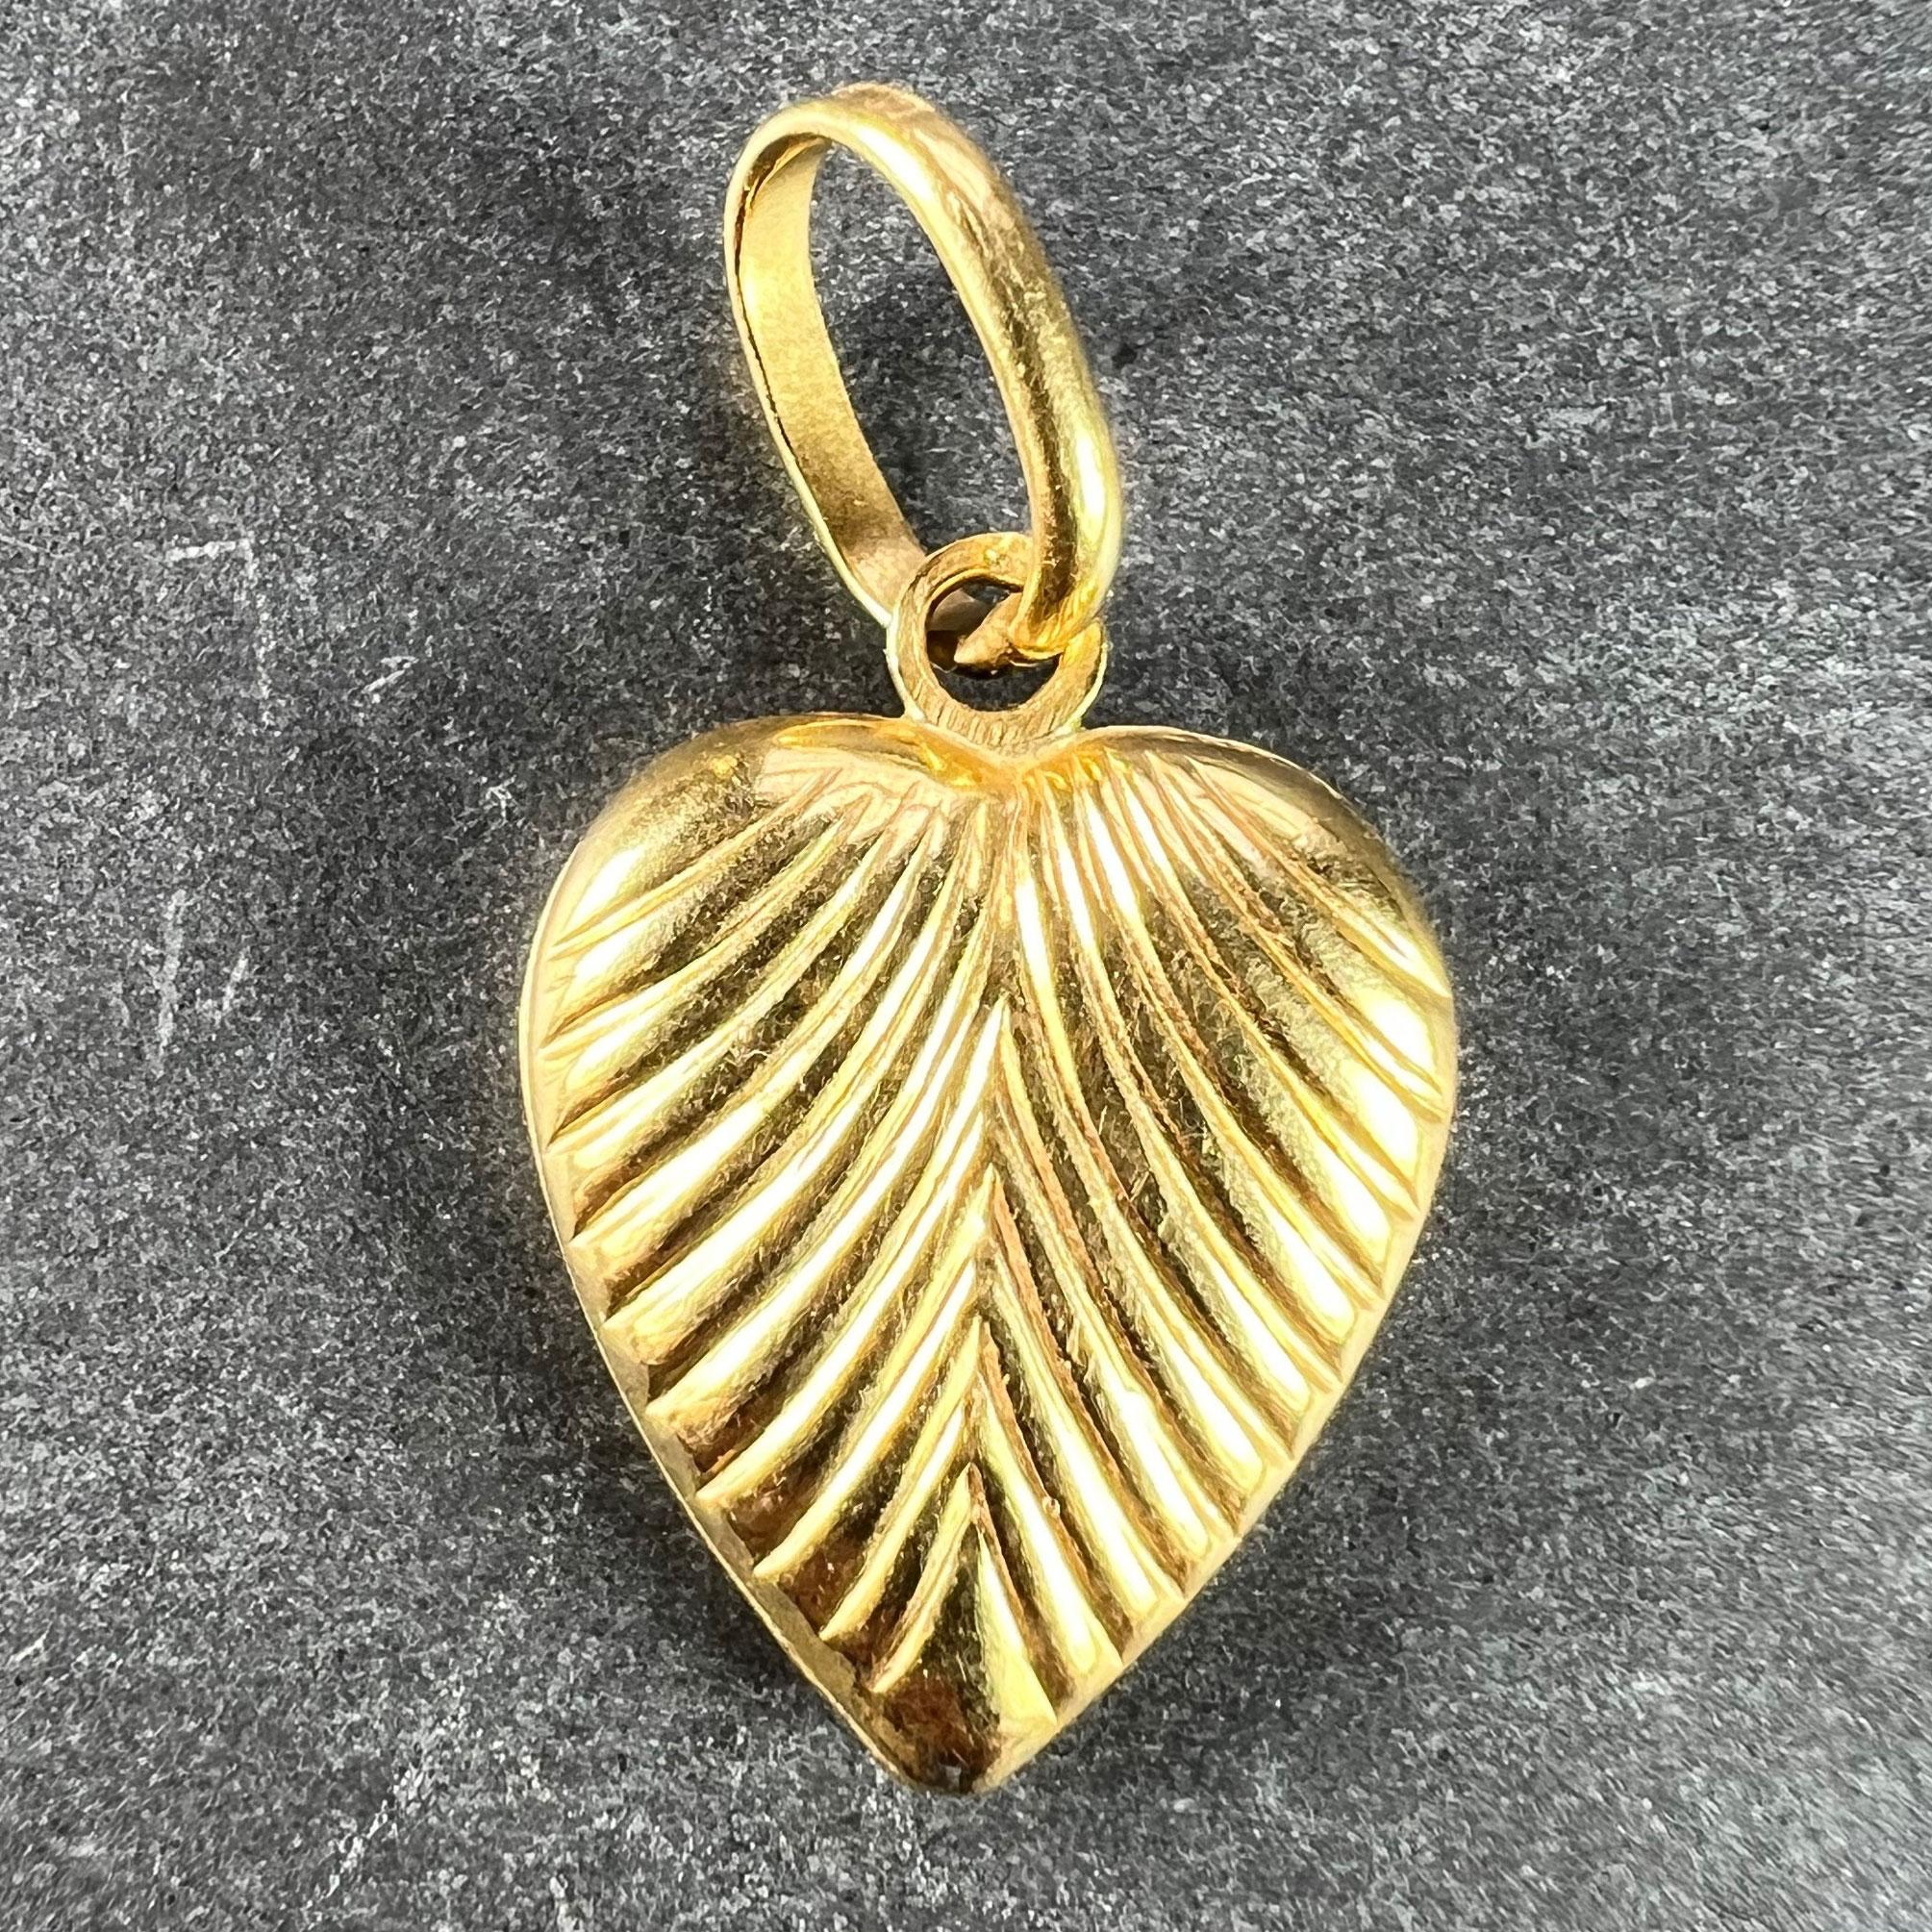 An Italian 18 karat (18K) yellow gold charm pendant designed as a puffy heart with scalloped ridges. Stamped 750 for 18 karat gold and 569VI for Italian manufacture.

Dimensions: 1.5 x 1.1 x 0.33 cm (not including jump ring)
Weight: 1.14